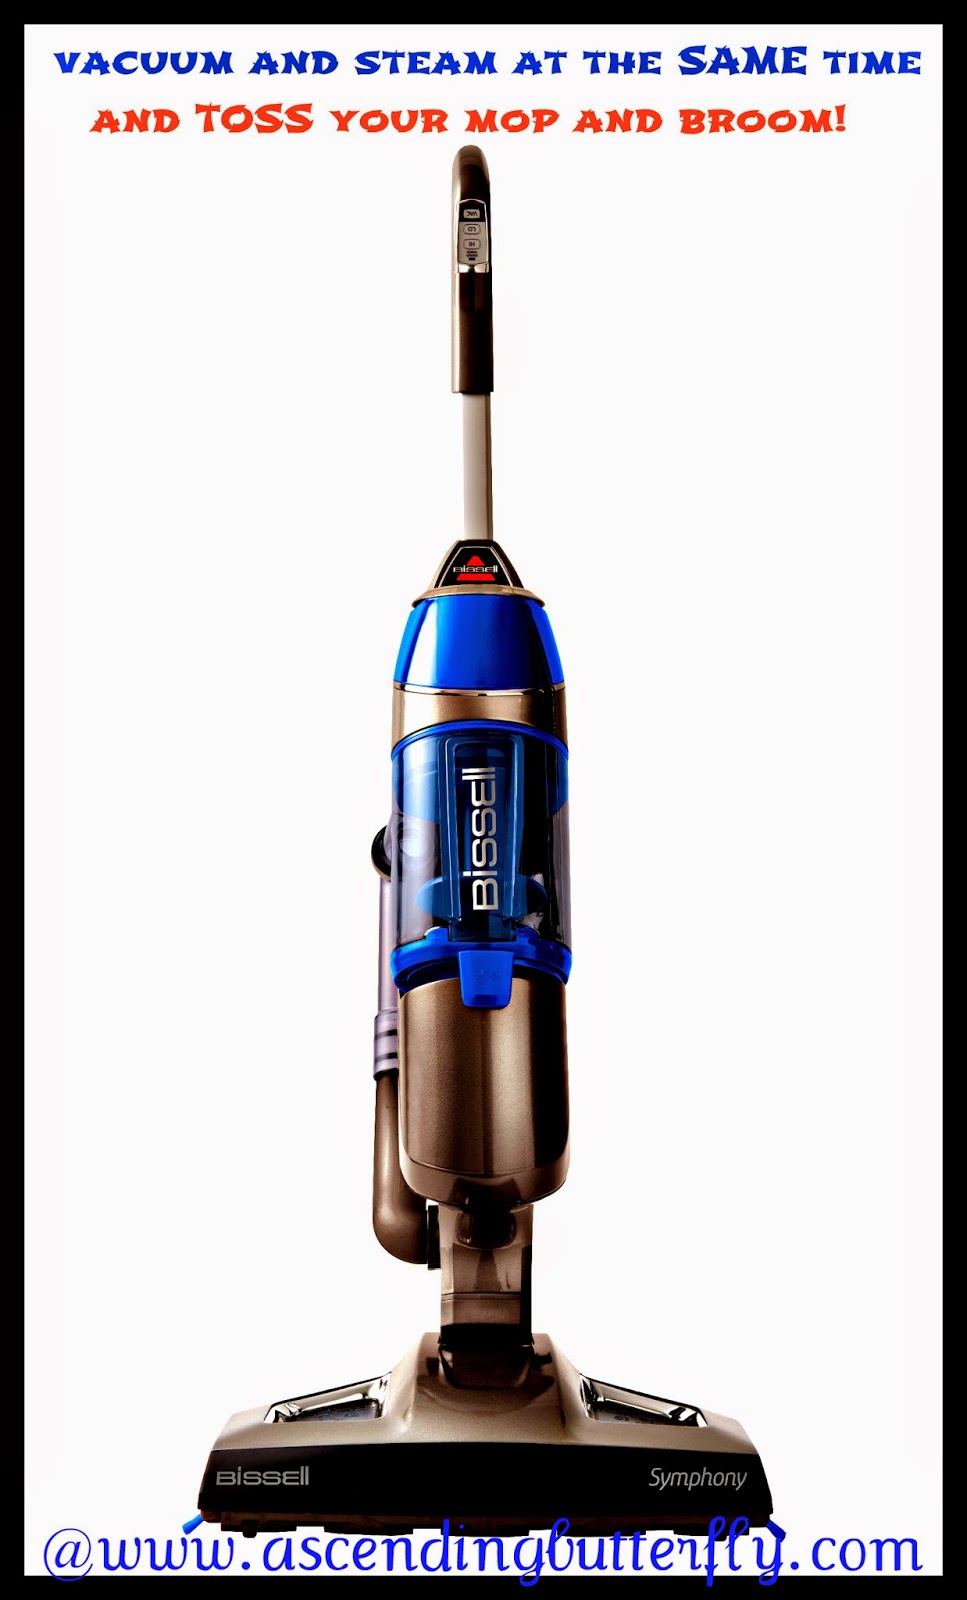 BISSELL - Symphony Bagless 2-in-1 Upright Vacuum/Steam Mop